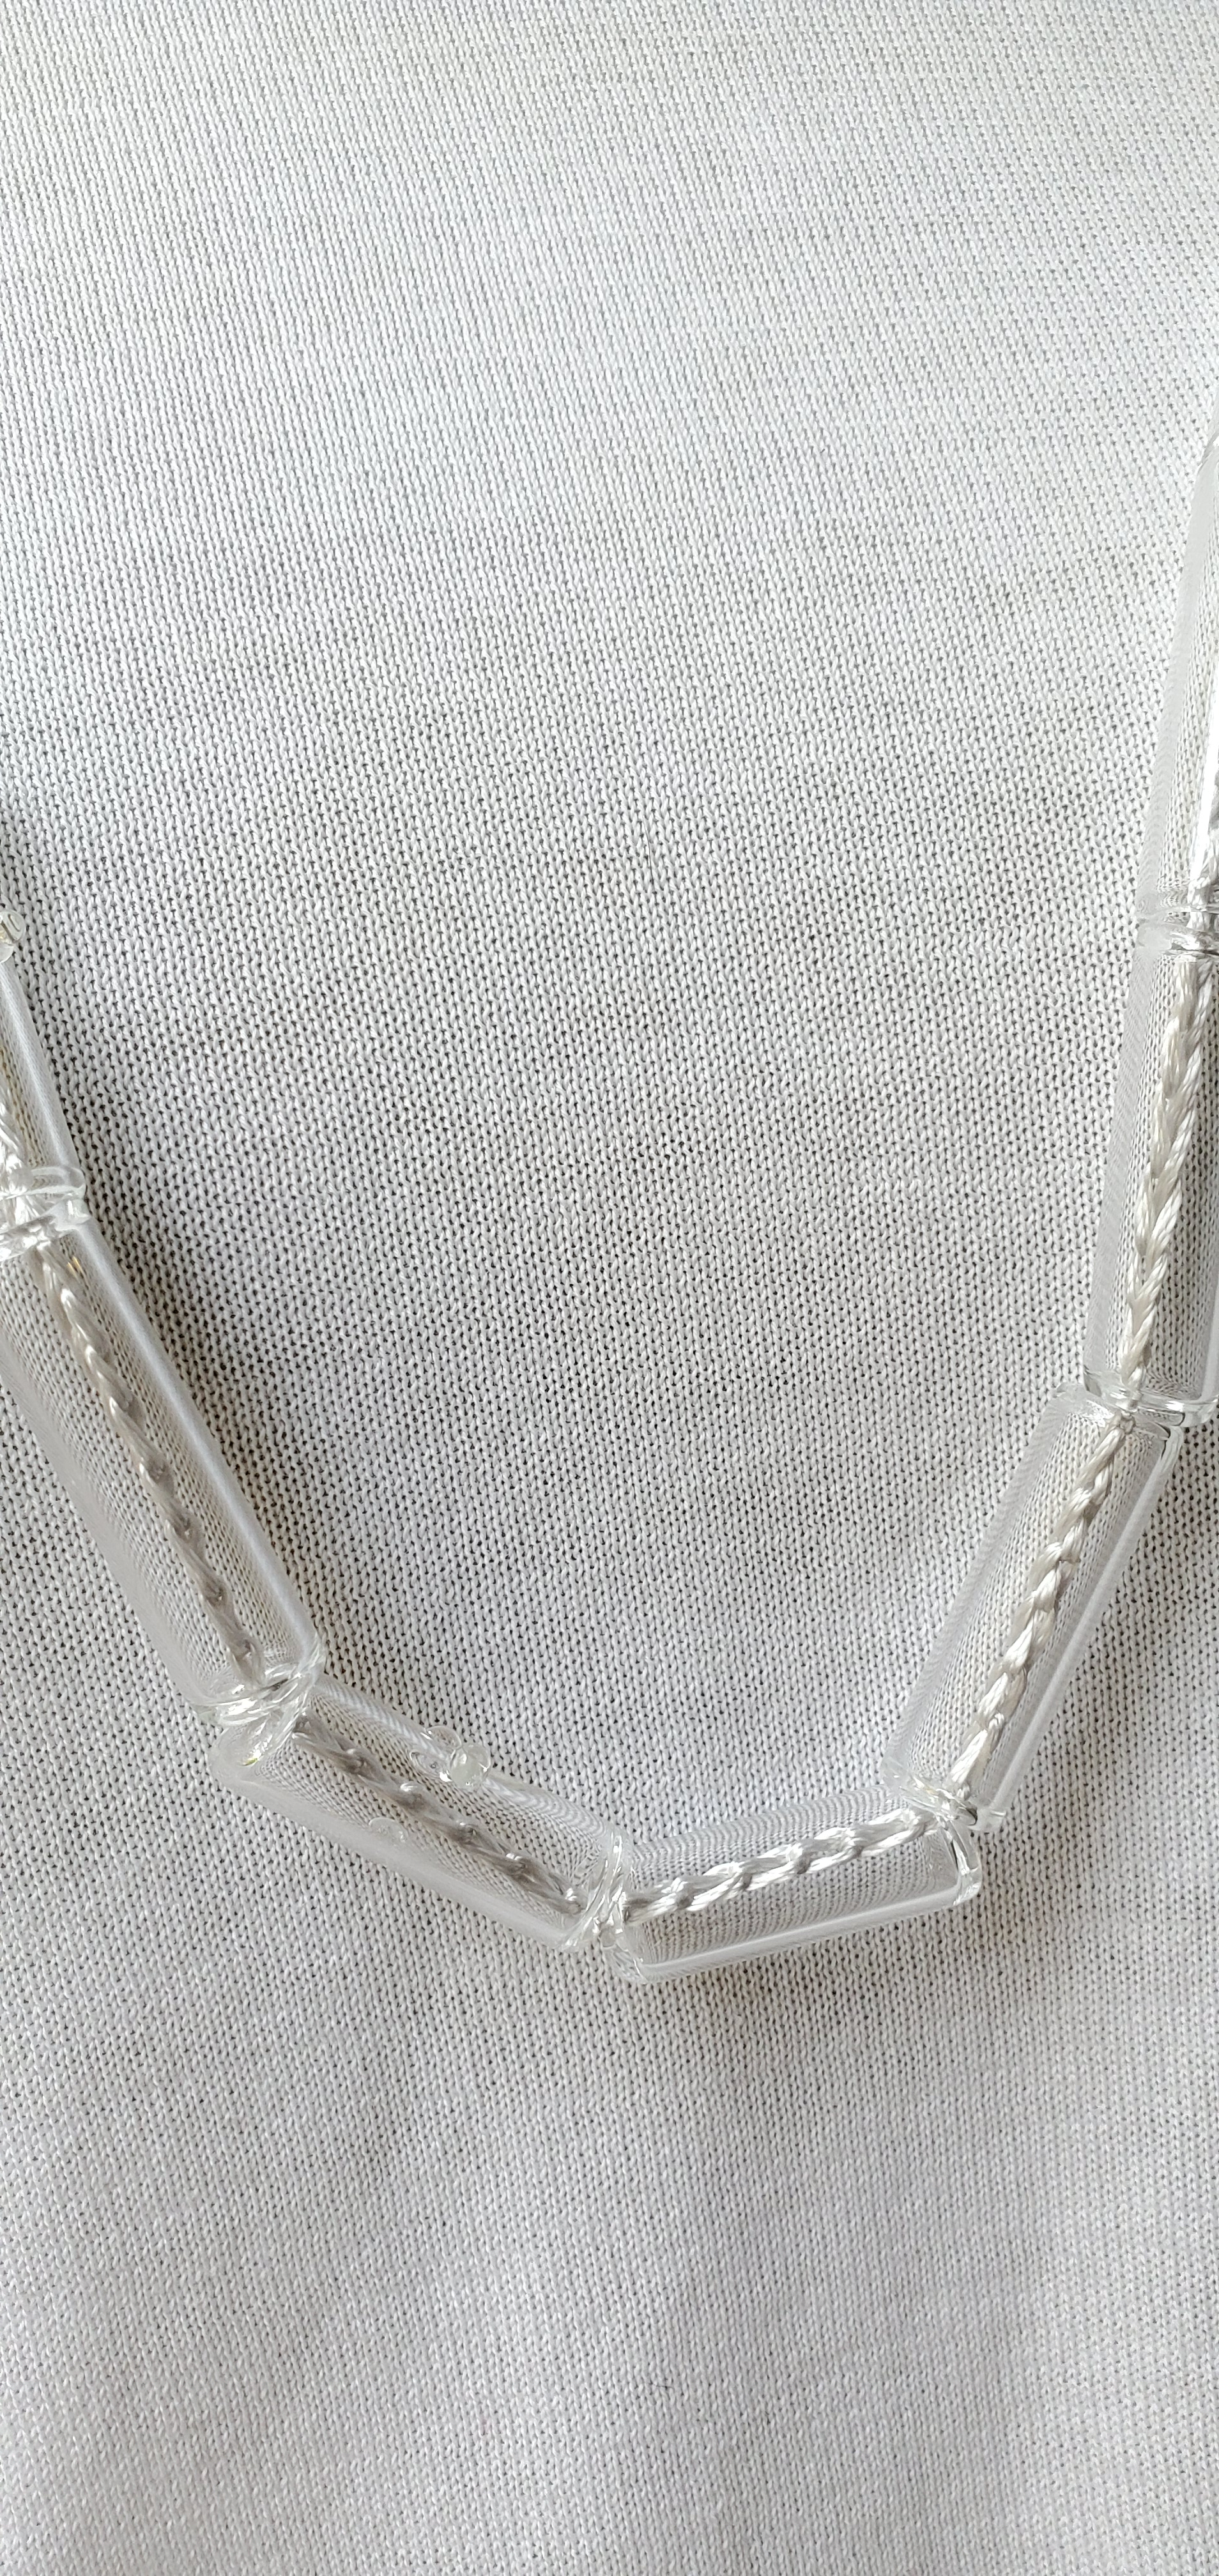 silver crochet cord clear glass tube necklace-small glass dots details-philadelphia